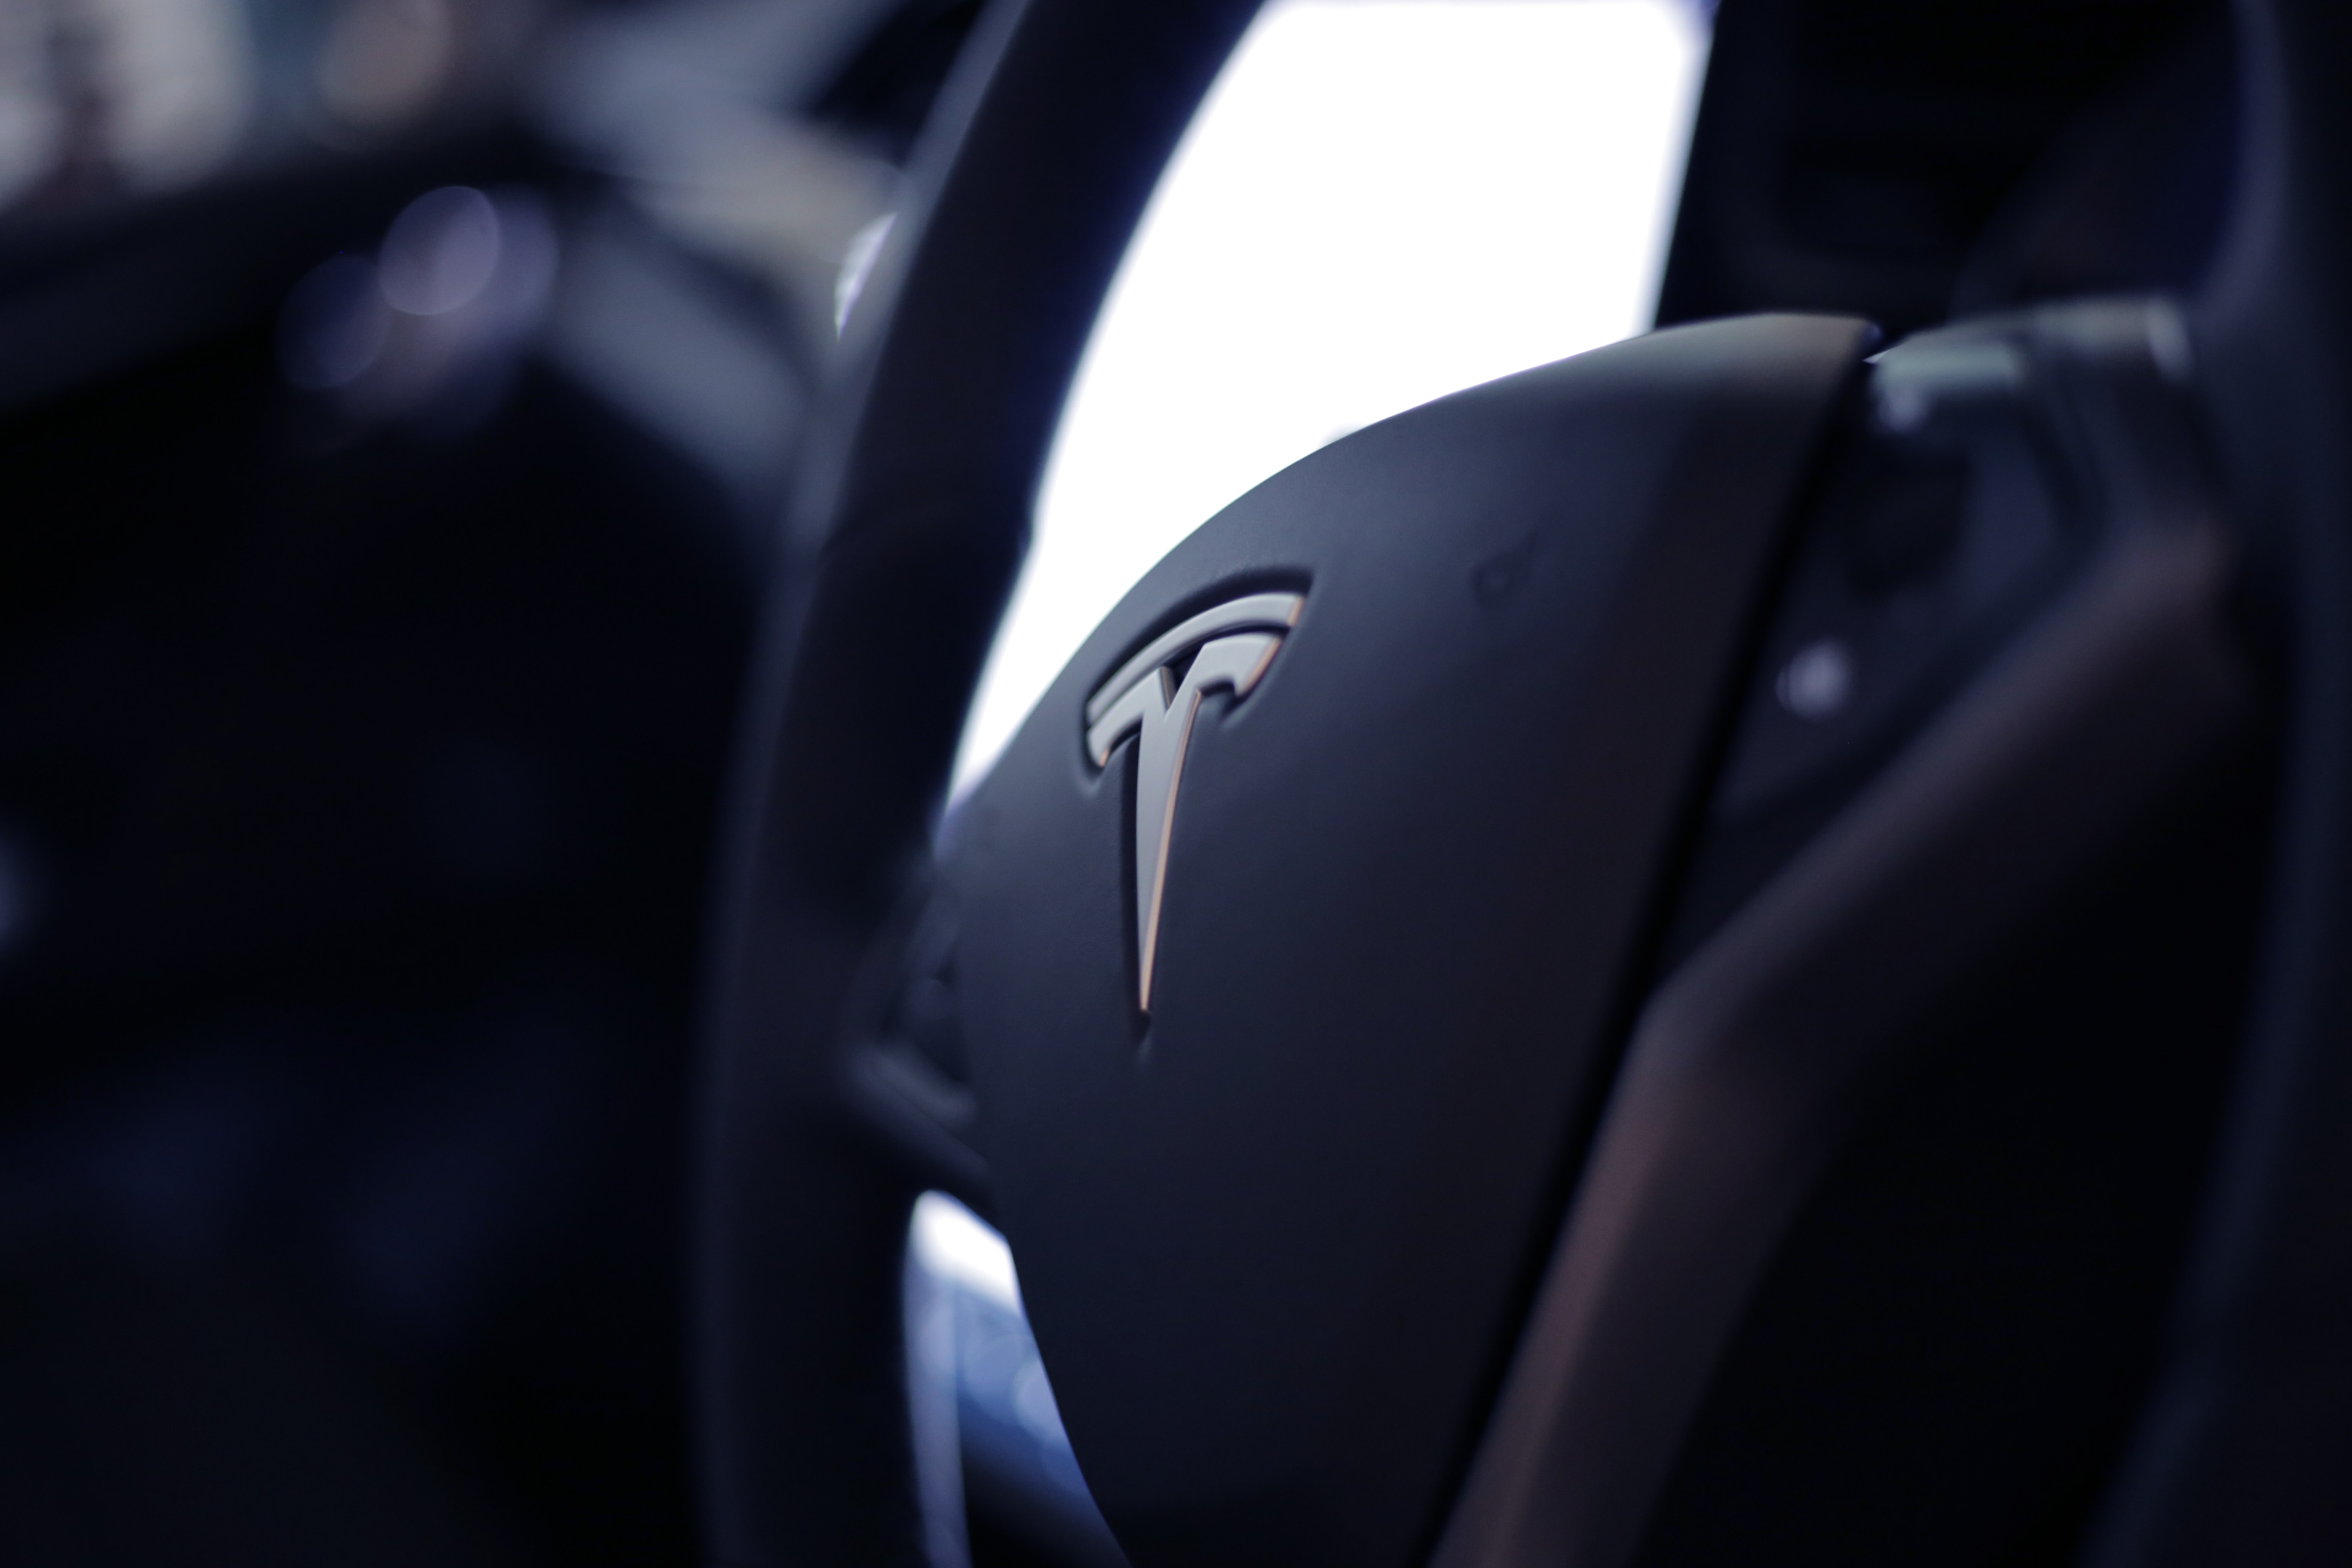 The Tesla logo on the steering wheel of one the cars.